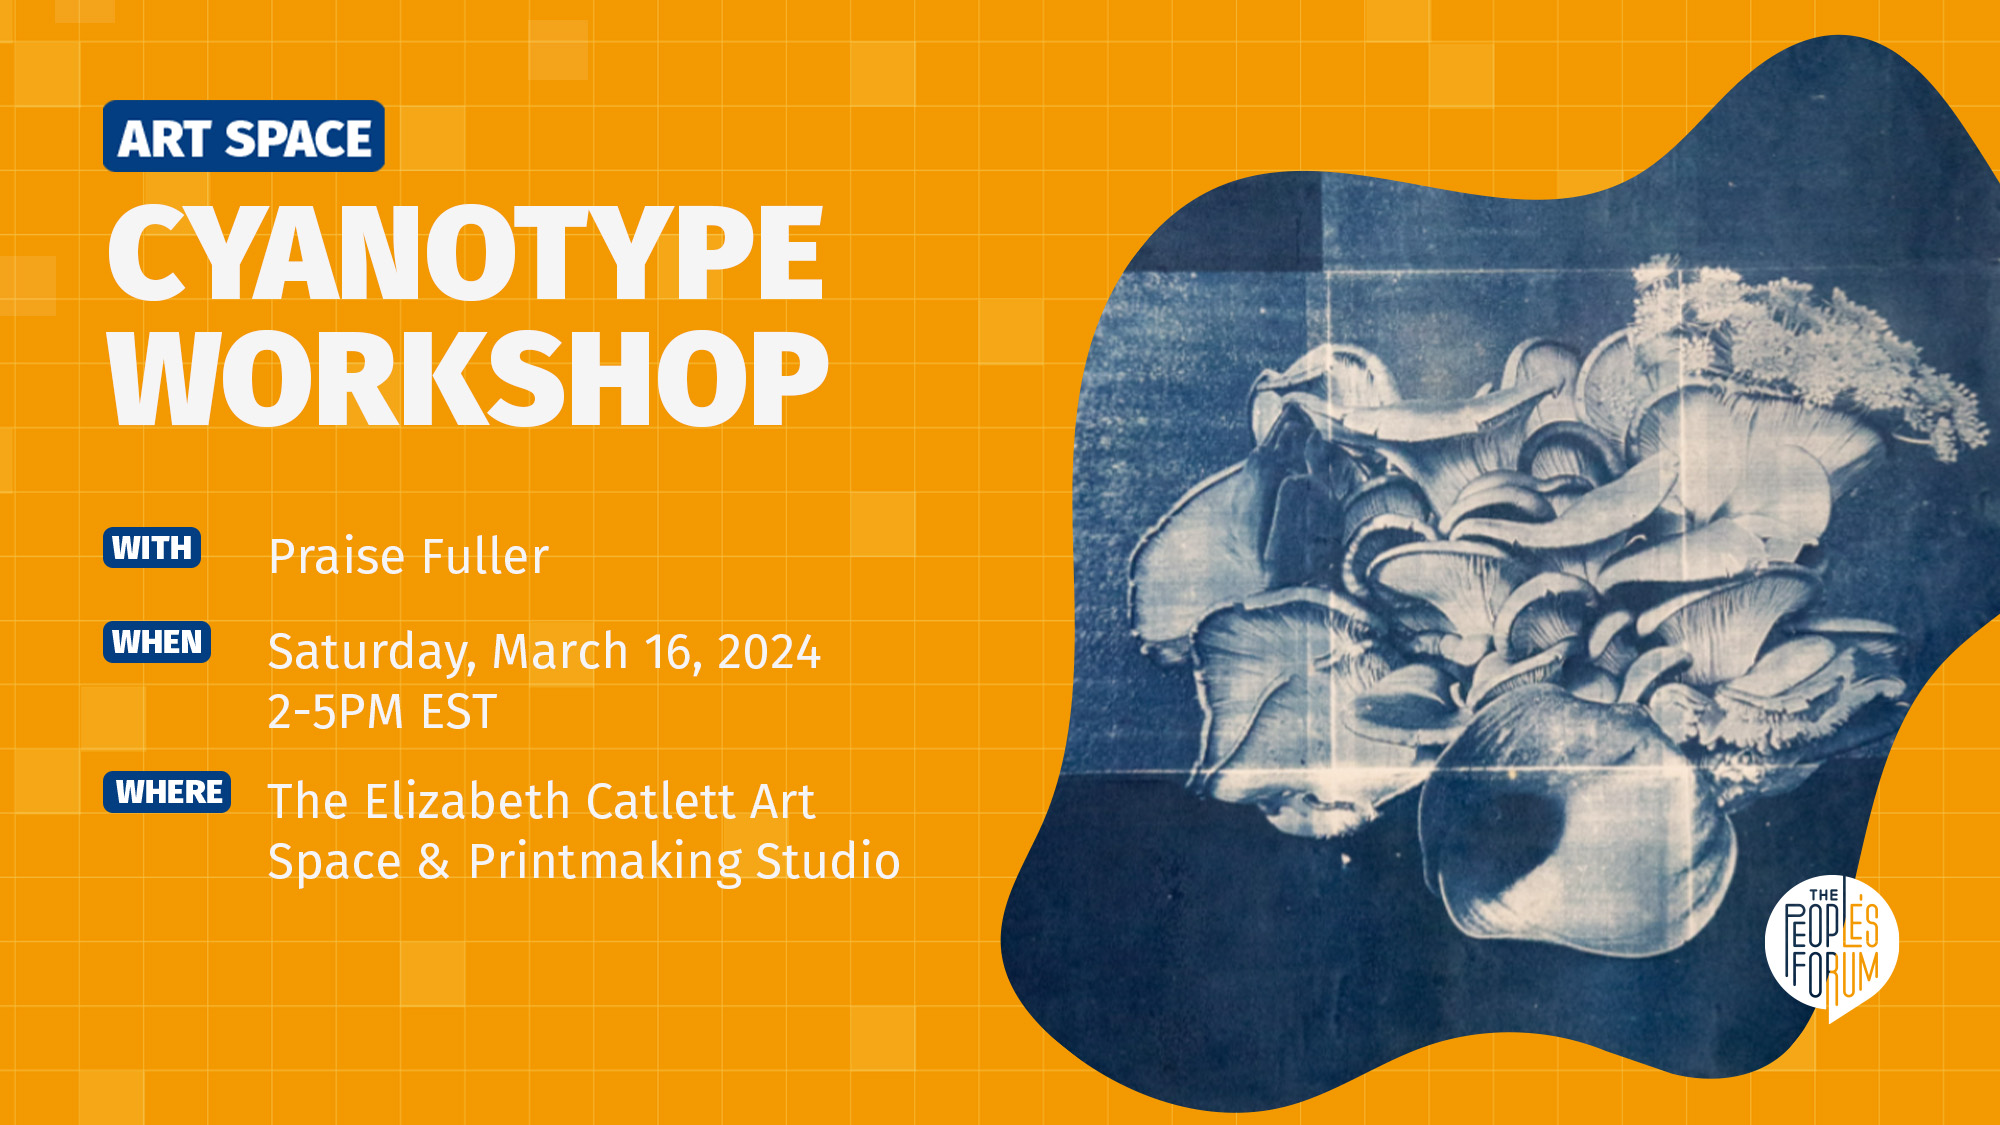 Orange banner with text reading "Cyanotype Workshop," an image of a cyanotype on the right